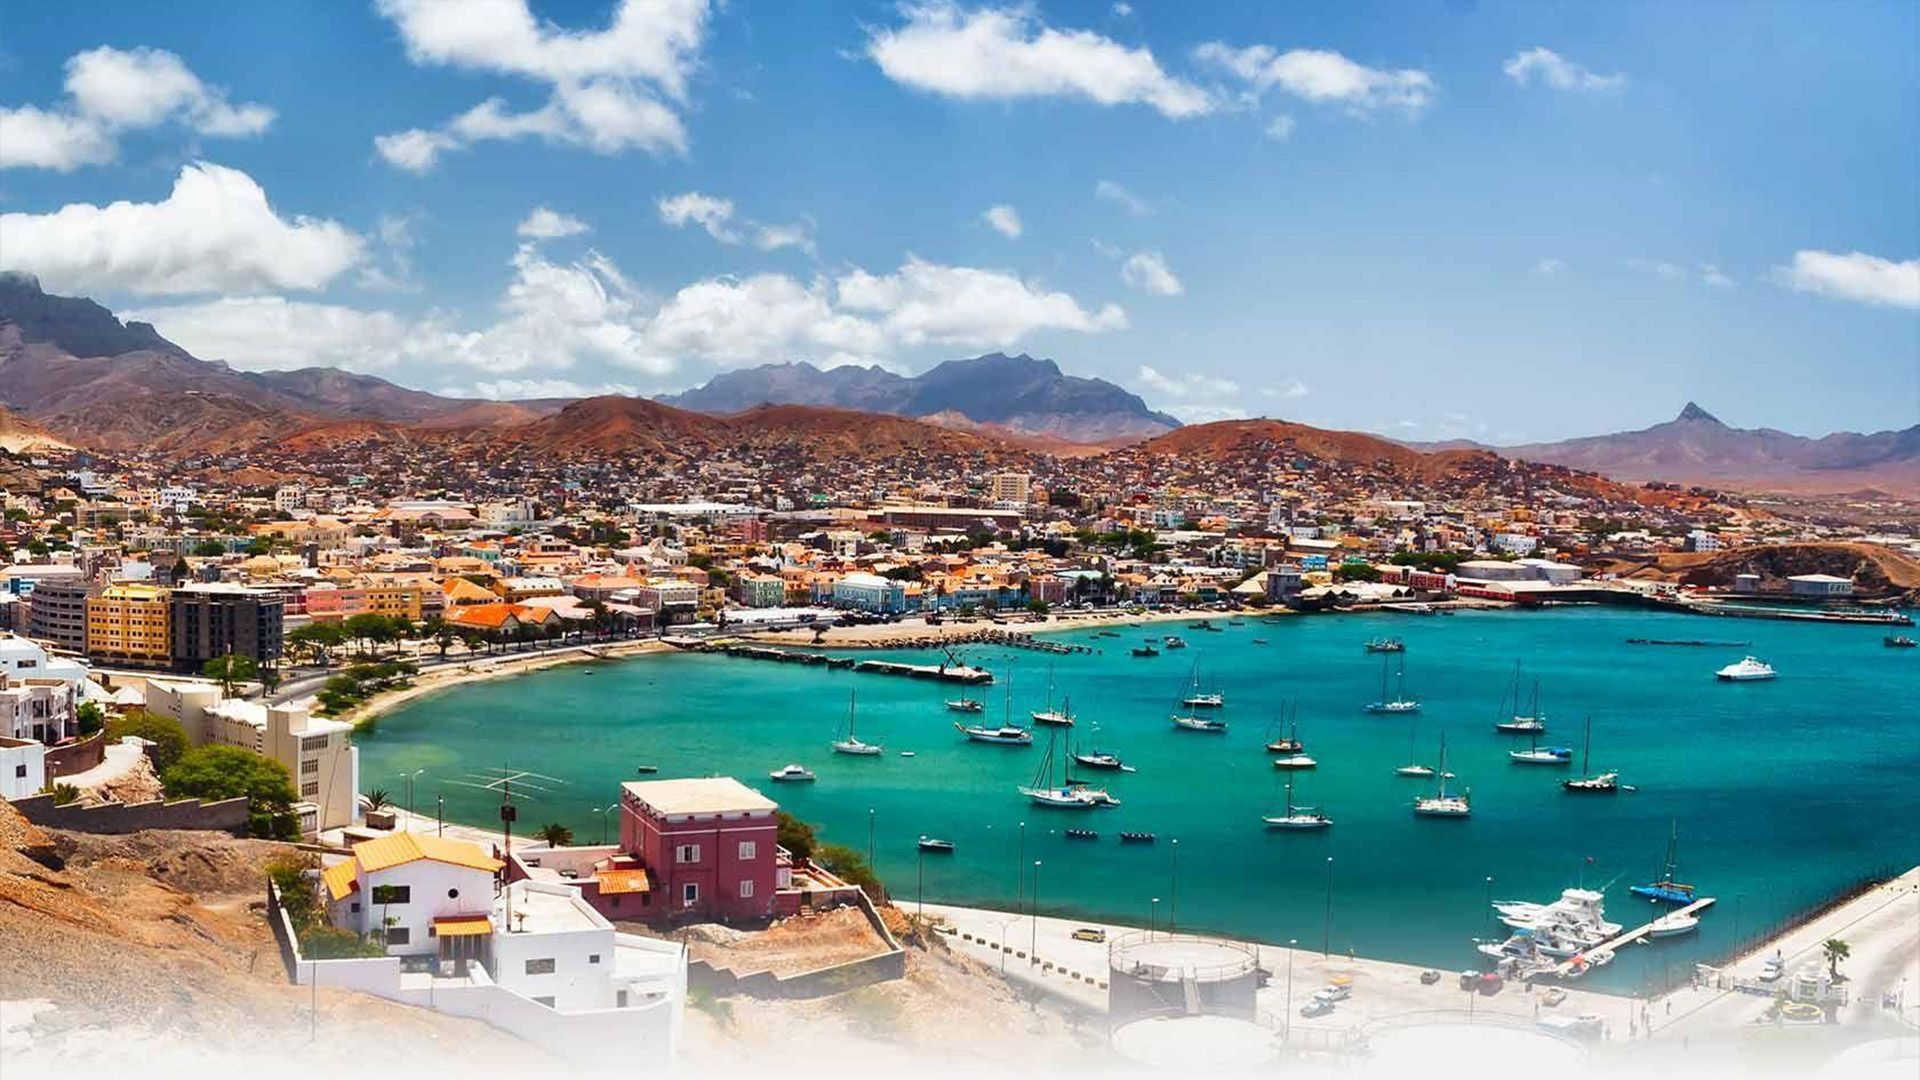 With PayPorter, you can make fast, easy and safe money transfers to  Cape Verde Islands at the most affordable prices!